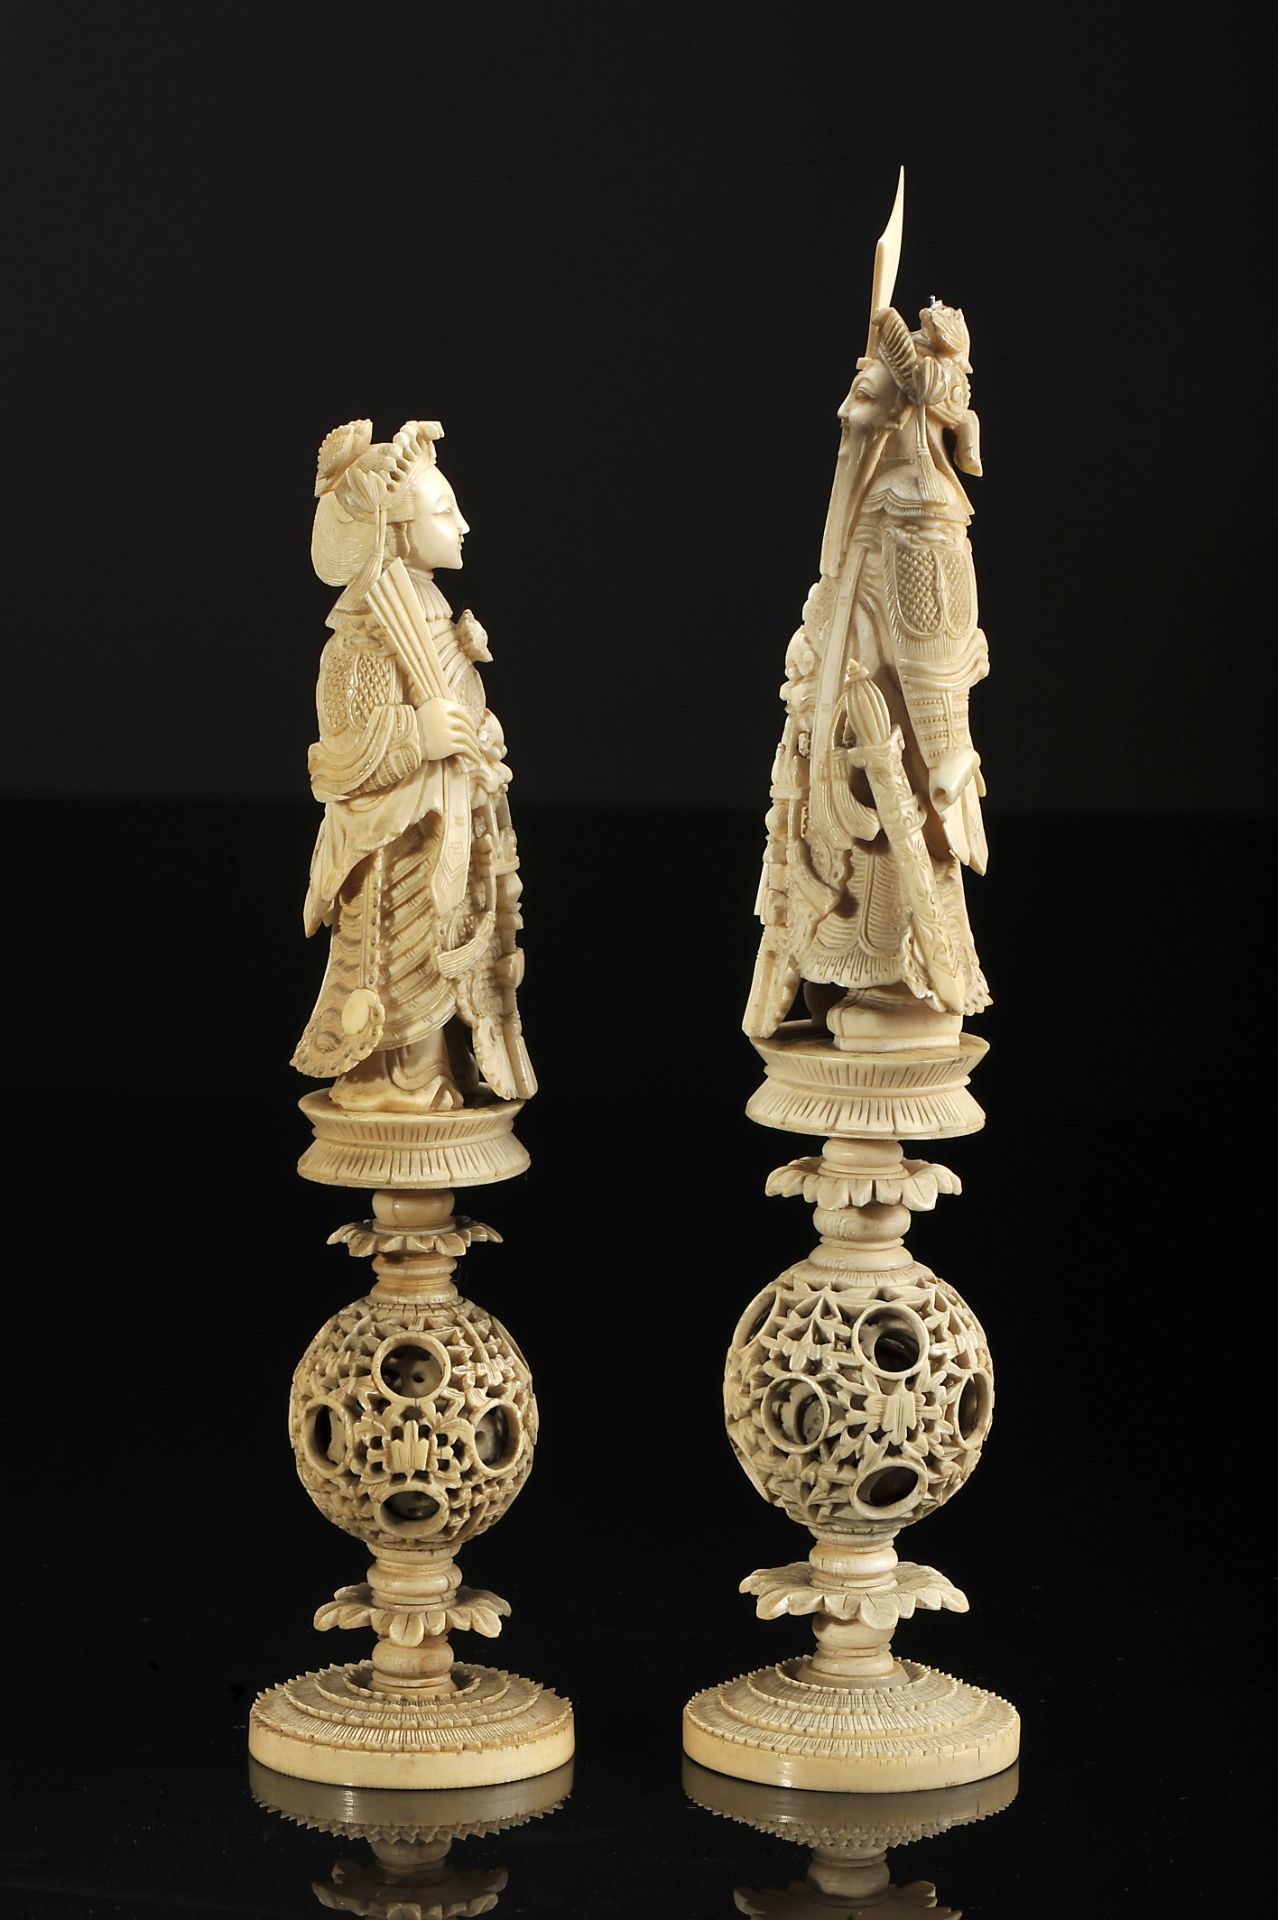 Chess pieces, "Emperor" and "Empress" based on "Ball of happiness" - Image 4 of 4